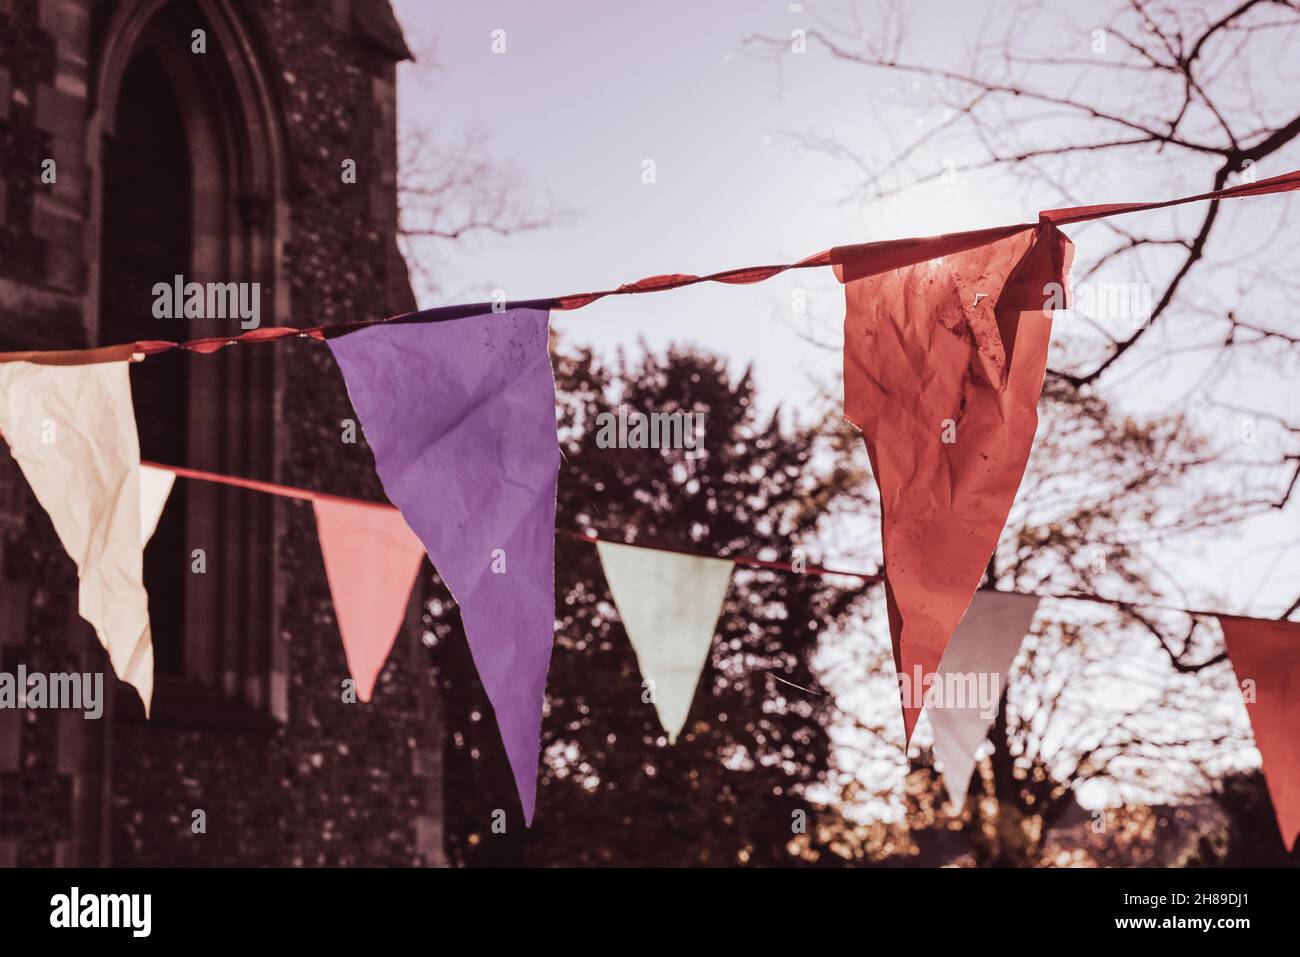 Vintage style bunting hangs outside to celebrate an event Stock Photo